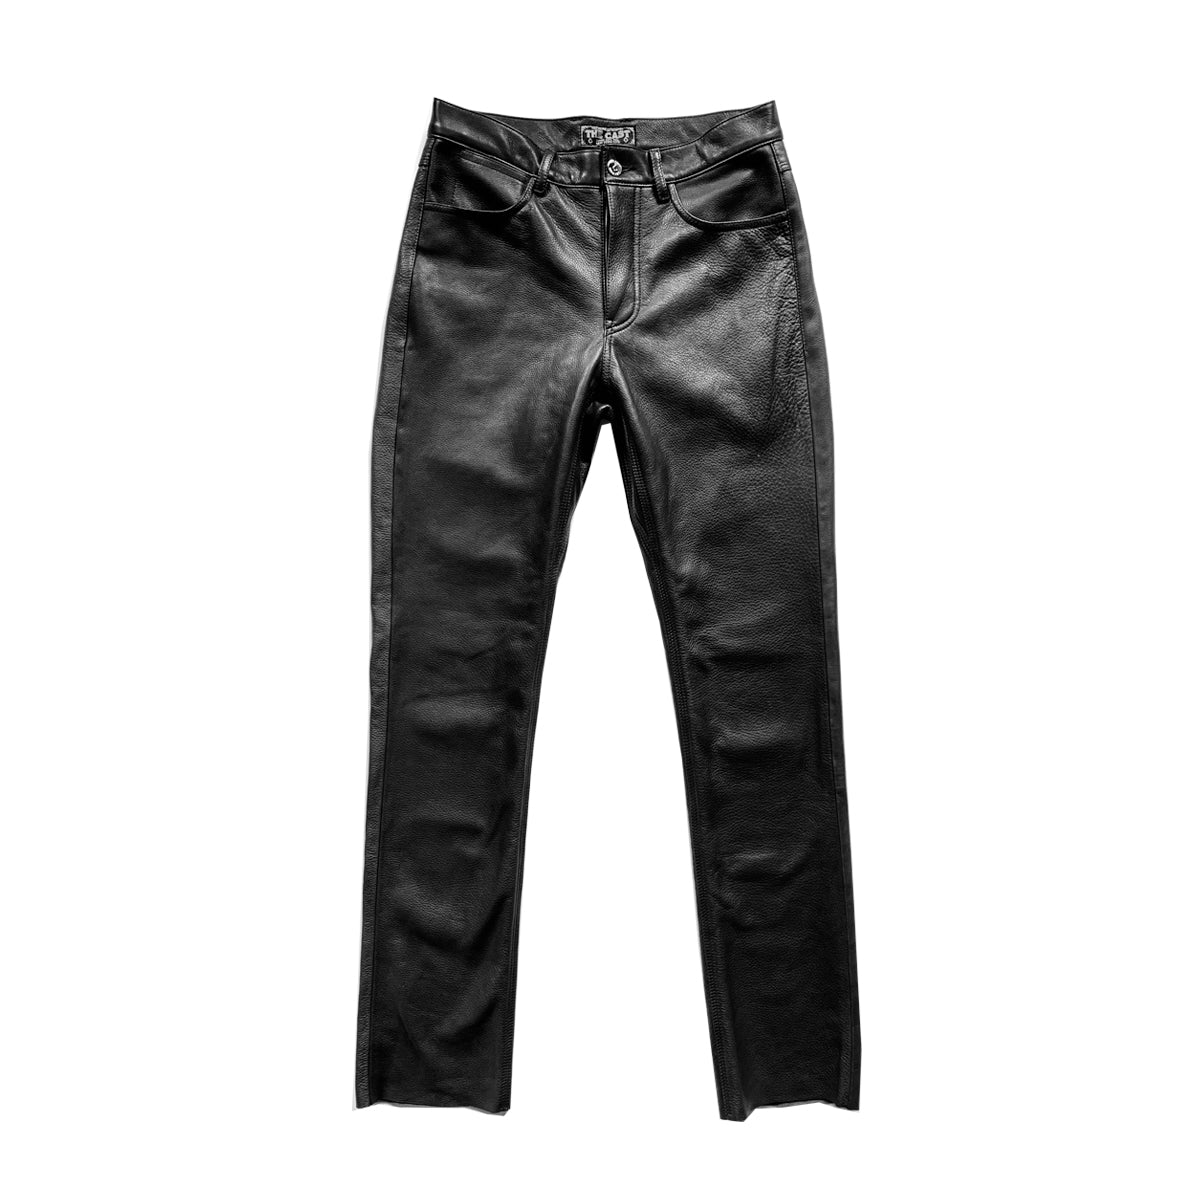 ZAPAKA Black High Waisted Suit Pants Mens For Wedding